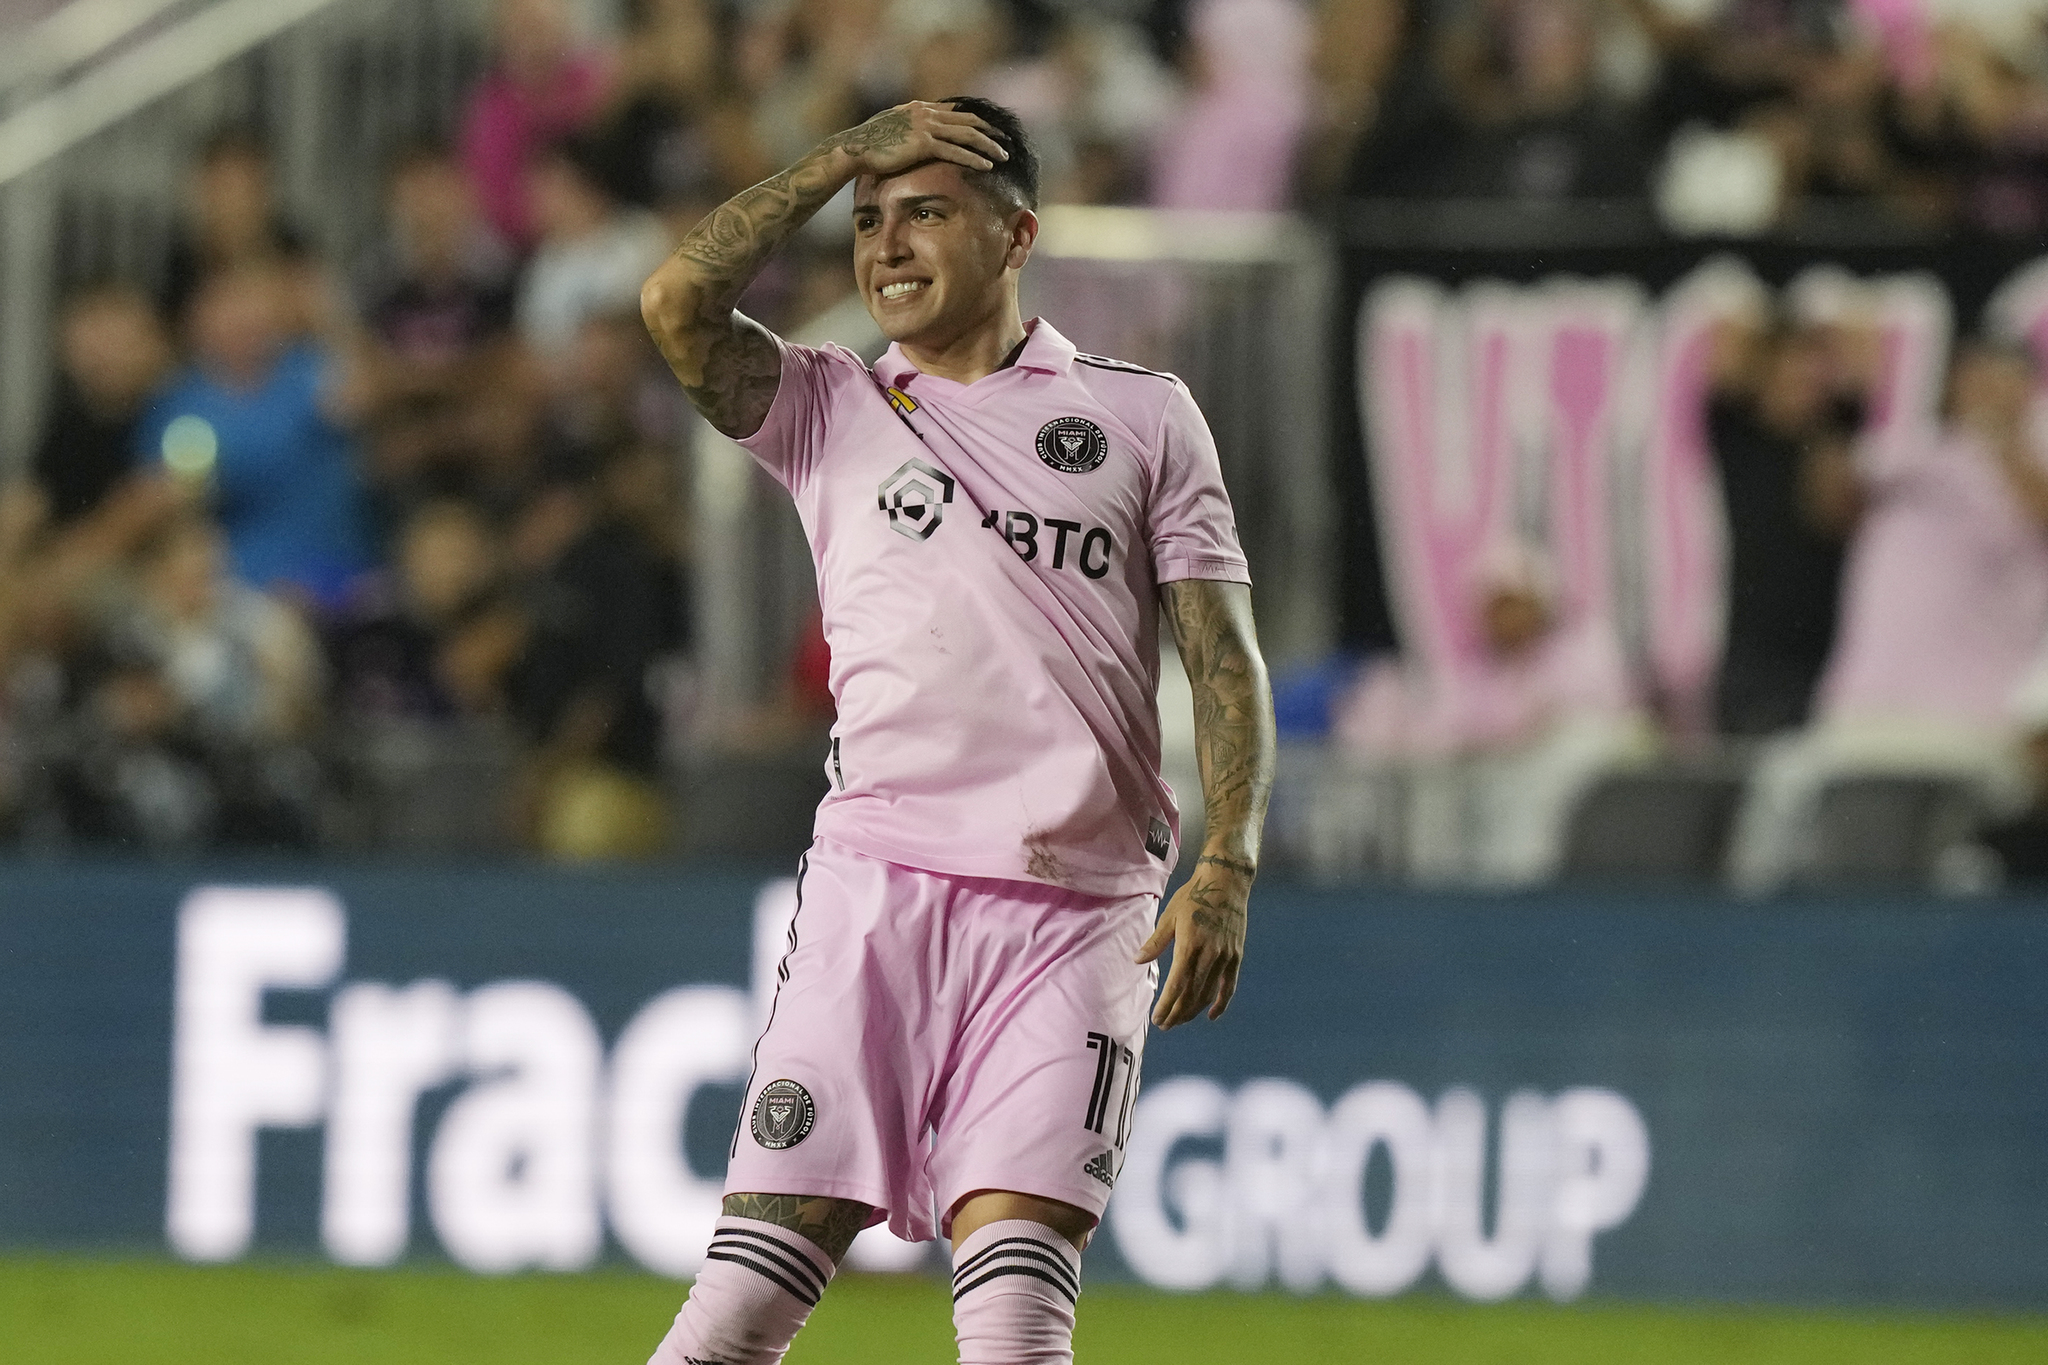 Farías during the match against the New York City